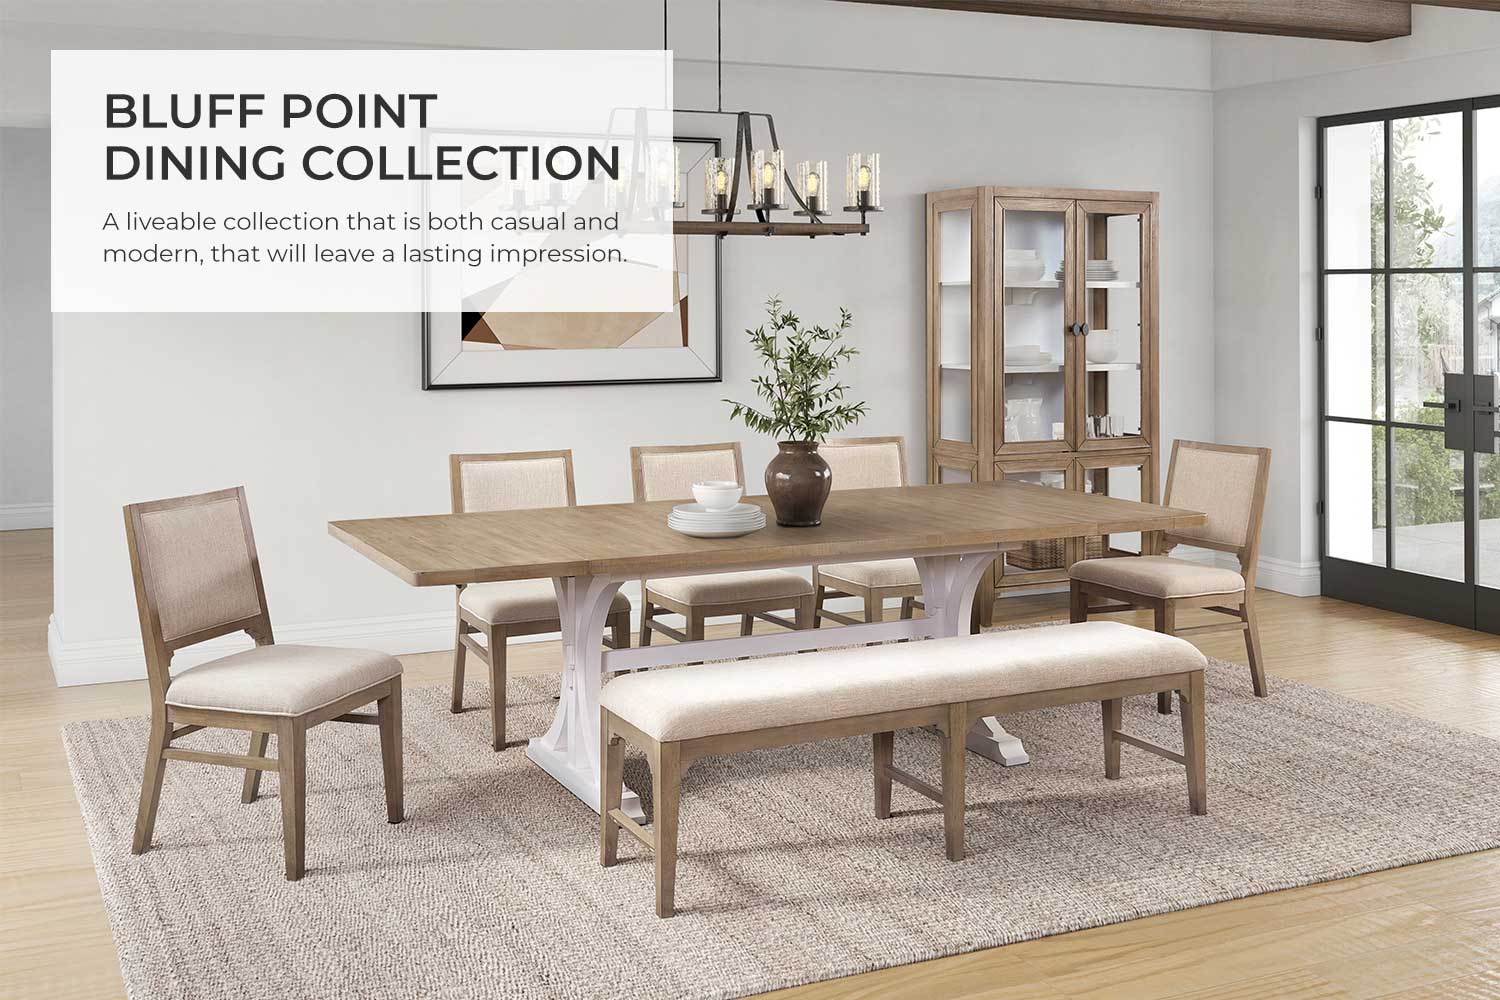 Bluff Point Dining Collection